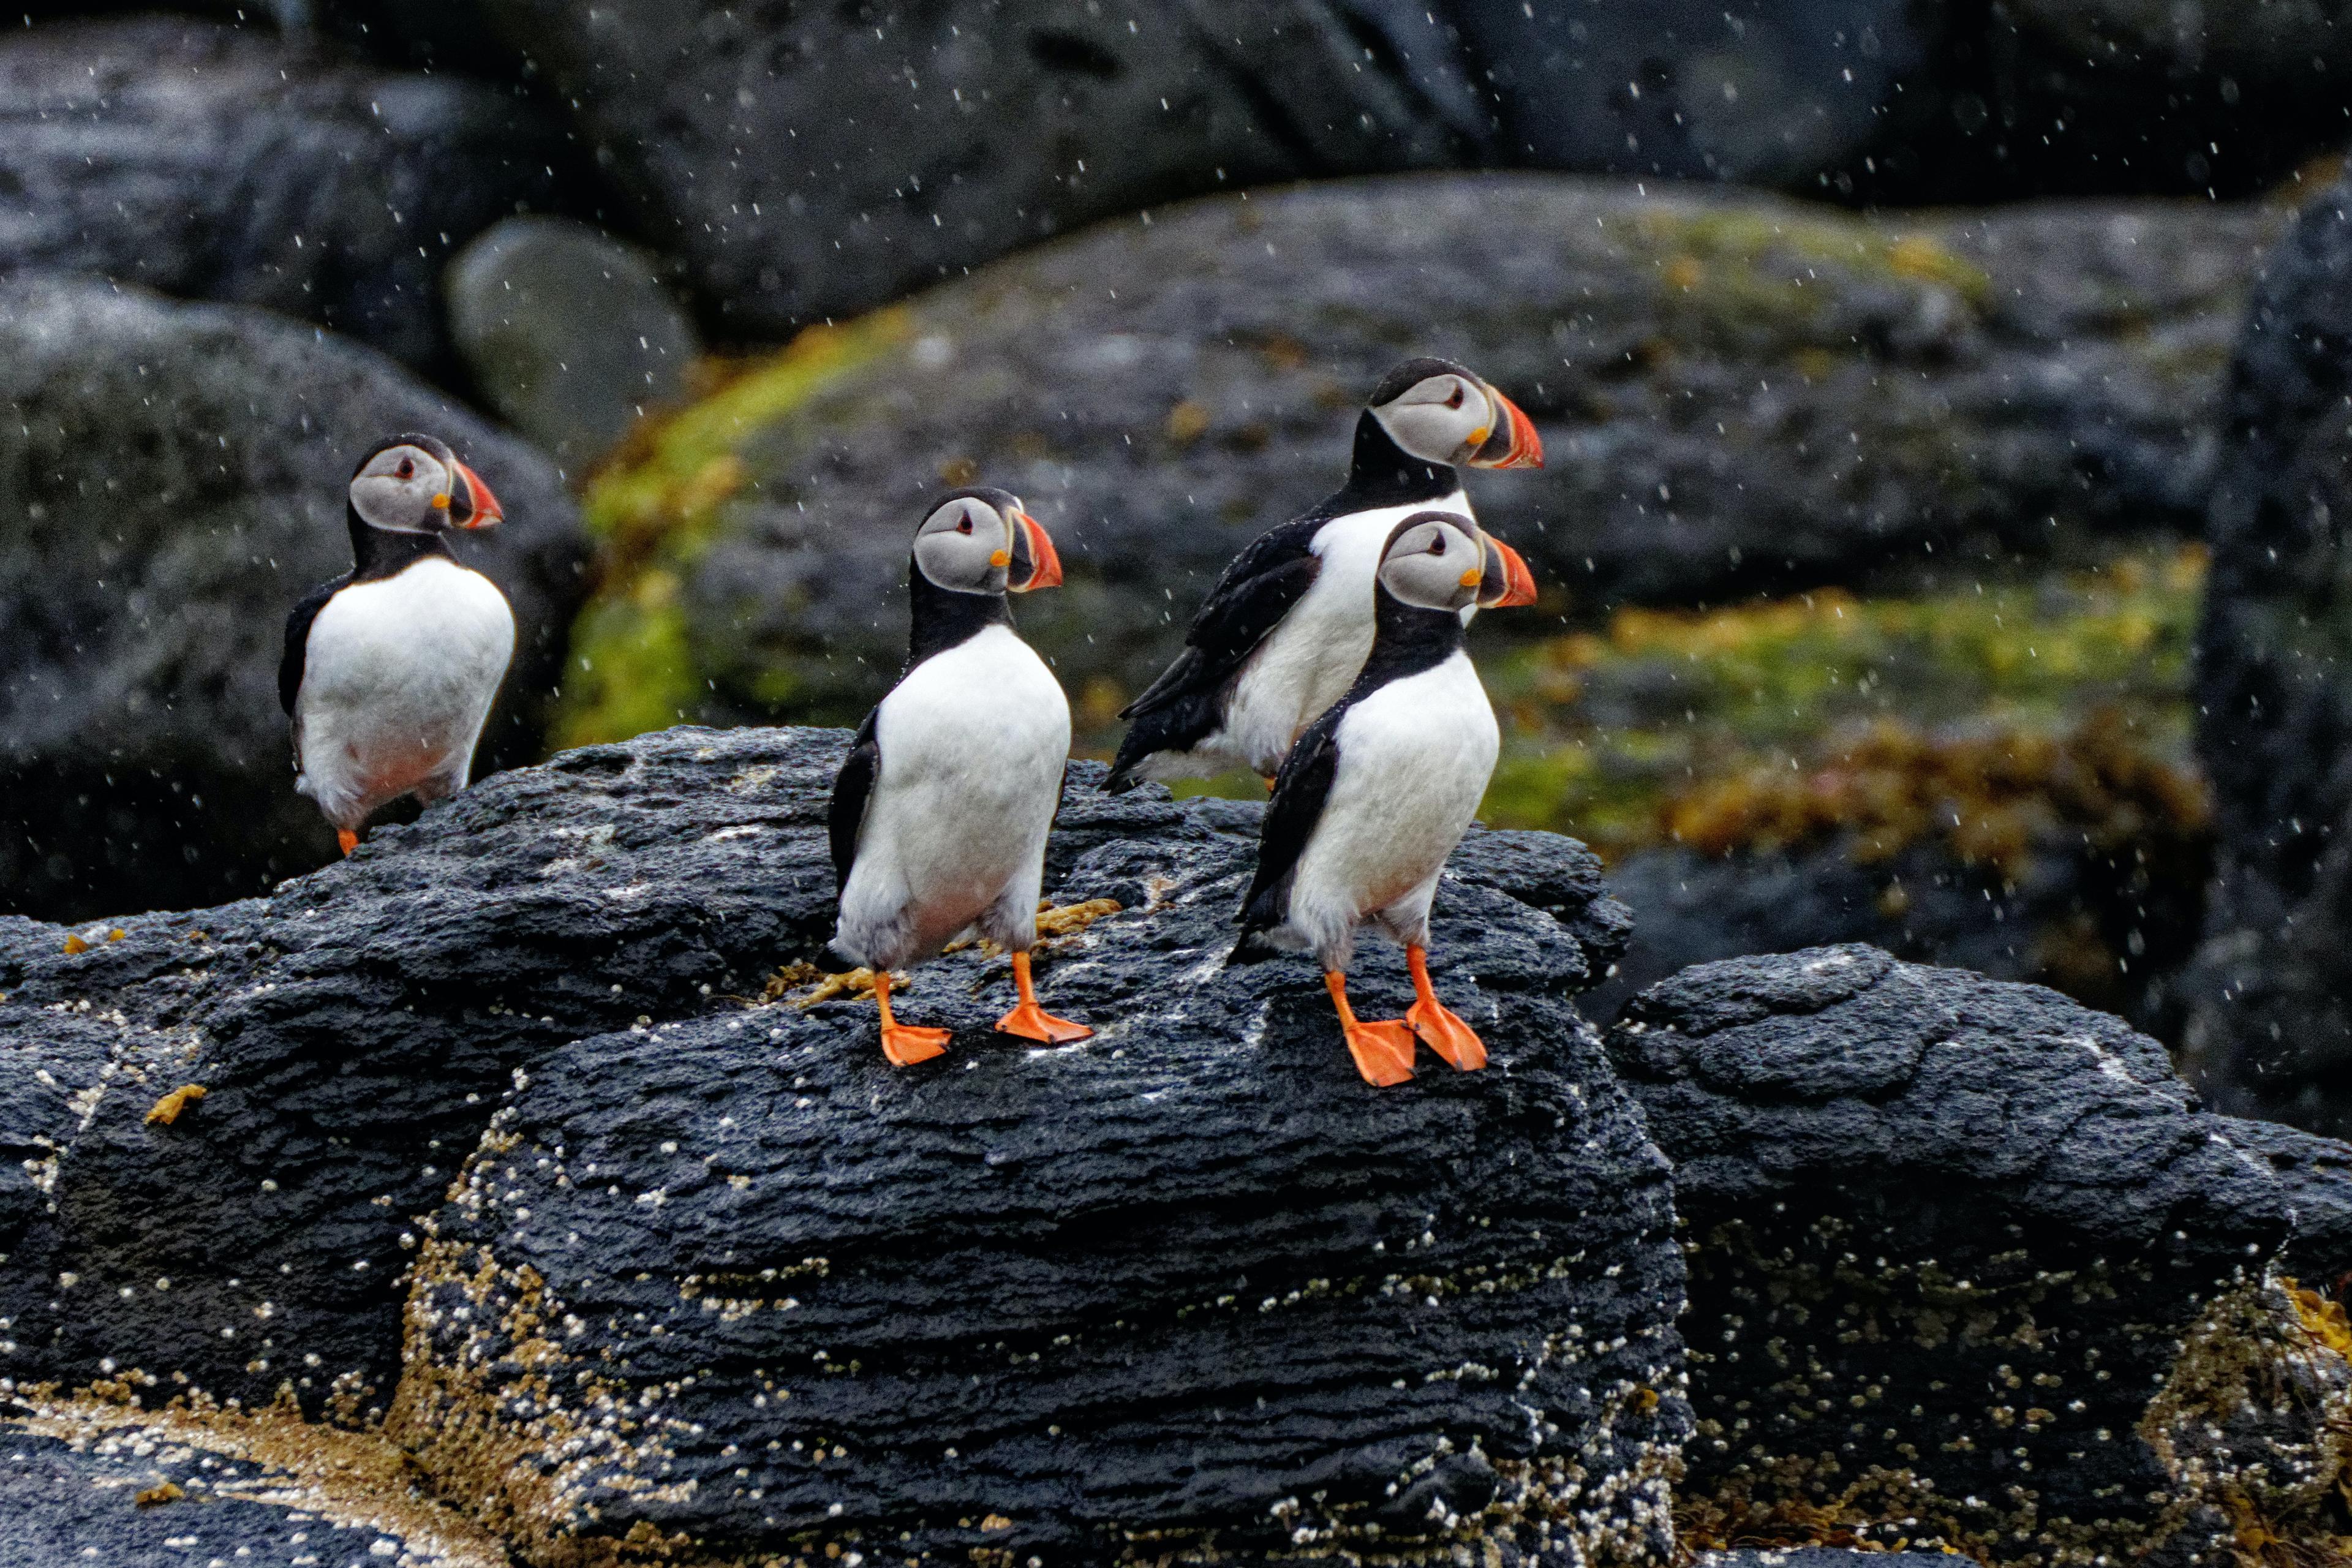 Four cute puffins perched on coastal rocks, poised to take flight.